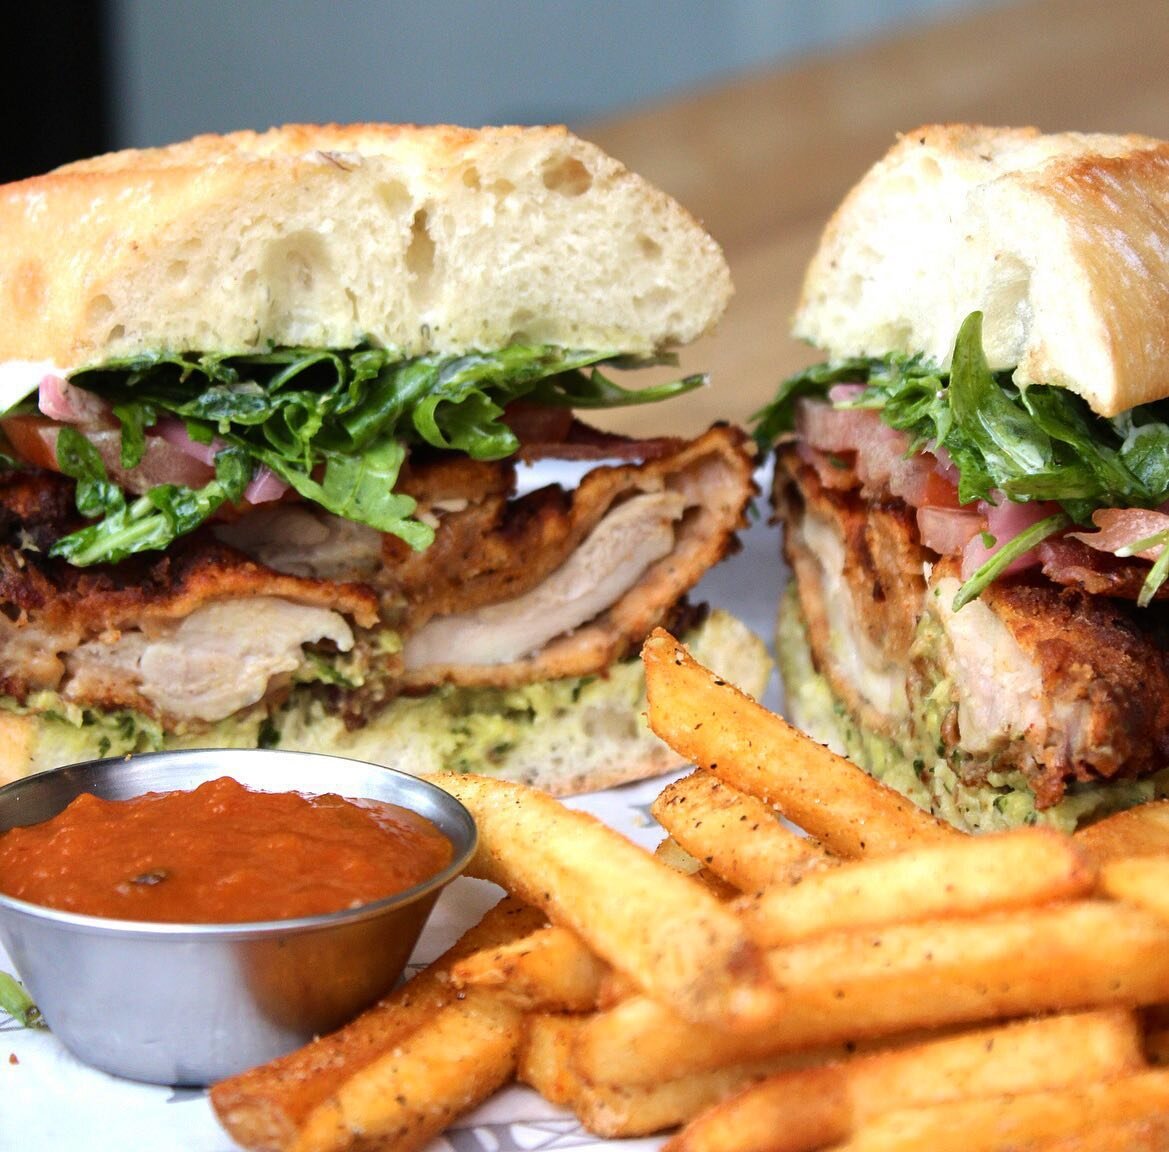 We&rsquo;ve got a new sandwich special for you! Introducing the California Club - Your choice of either grilled or crispy chicken, topped with guacamole, arugula, tomato, pickled red onion, crispy bacon, and house made ranch, all sandwiched between t